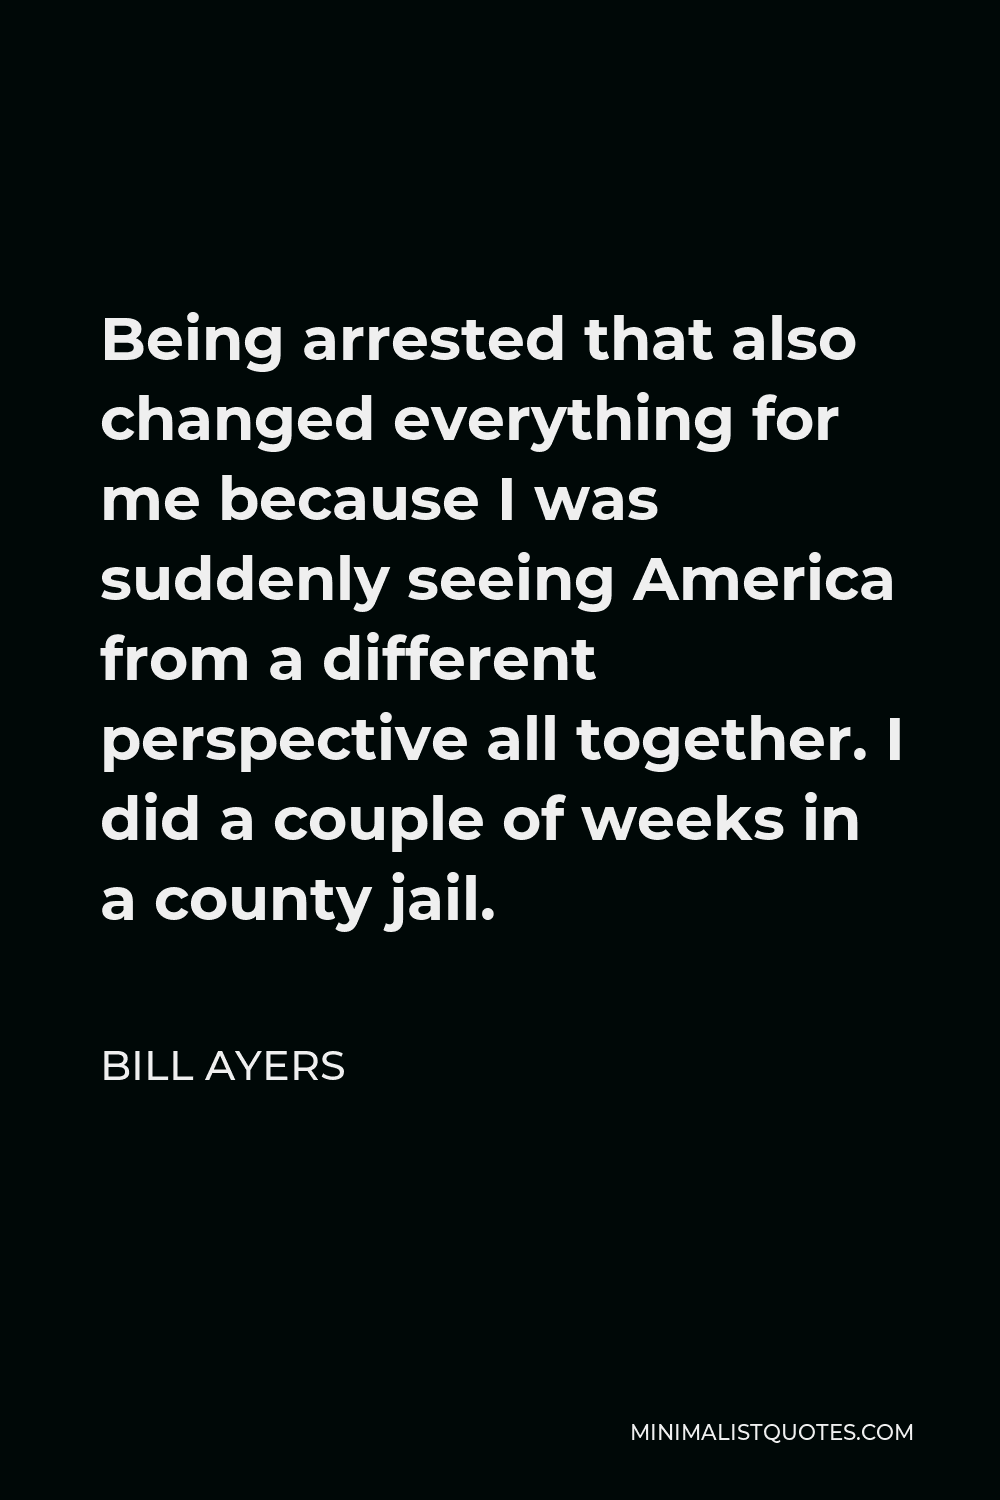 Bill Ayers Quote - Being arrested that also changed everything for me because I was suddenly seeing America from a different perspective all together. I did a couple of weeks in a county jail.